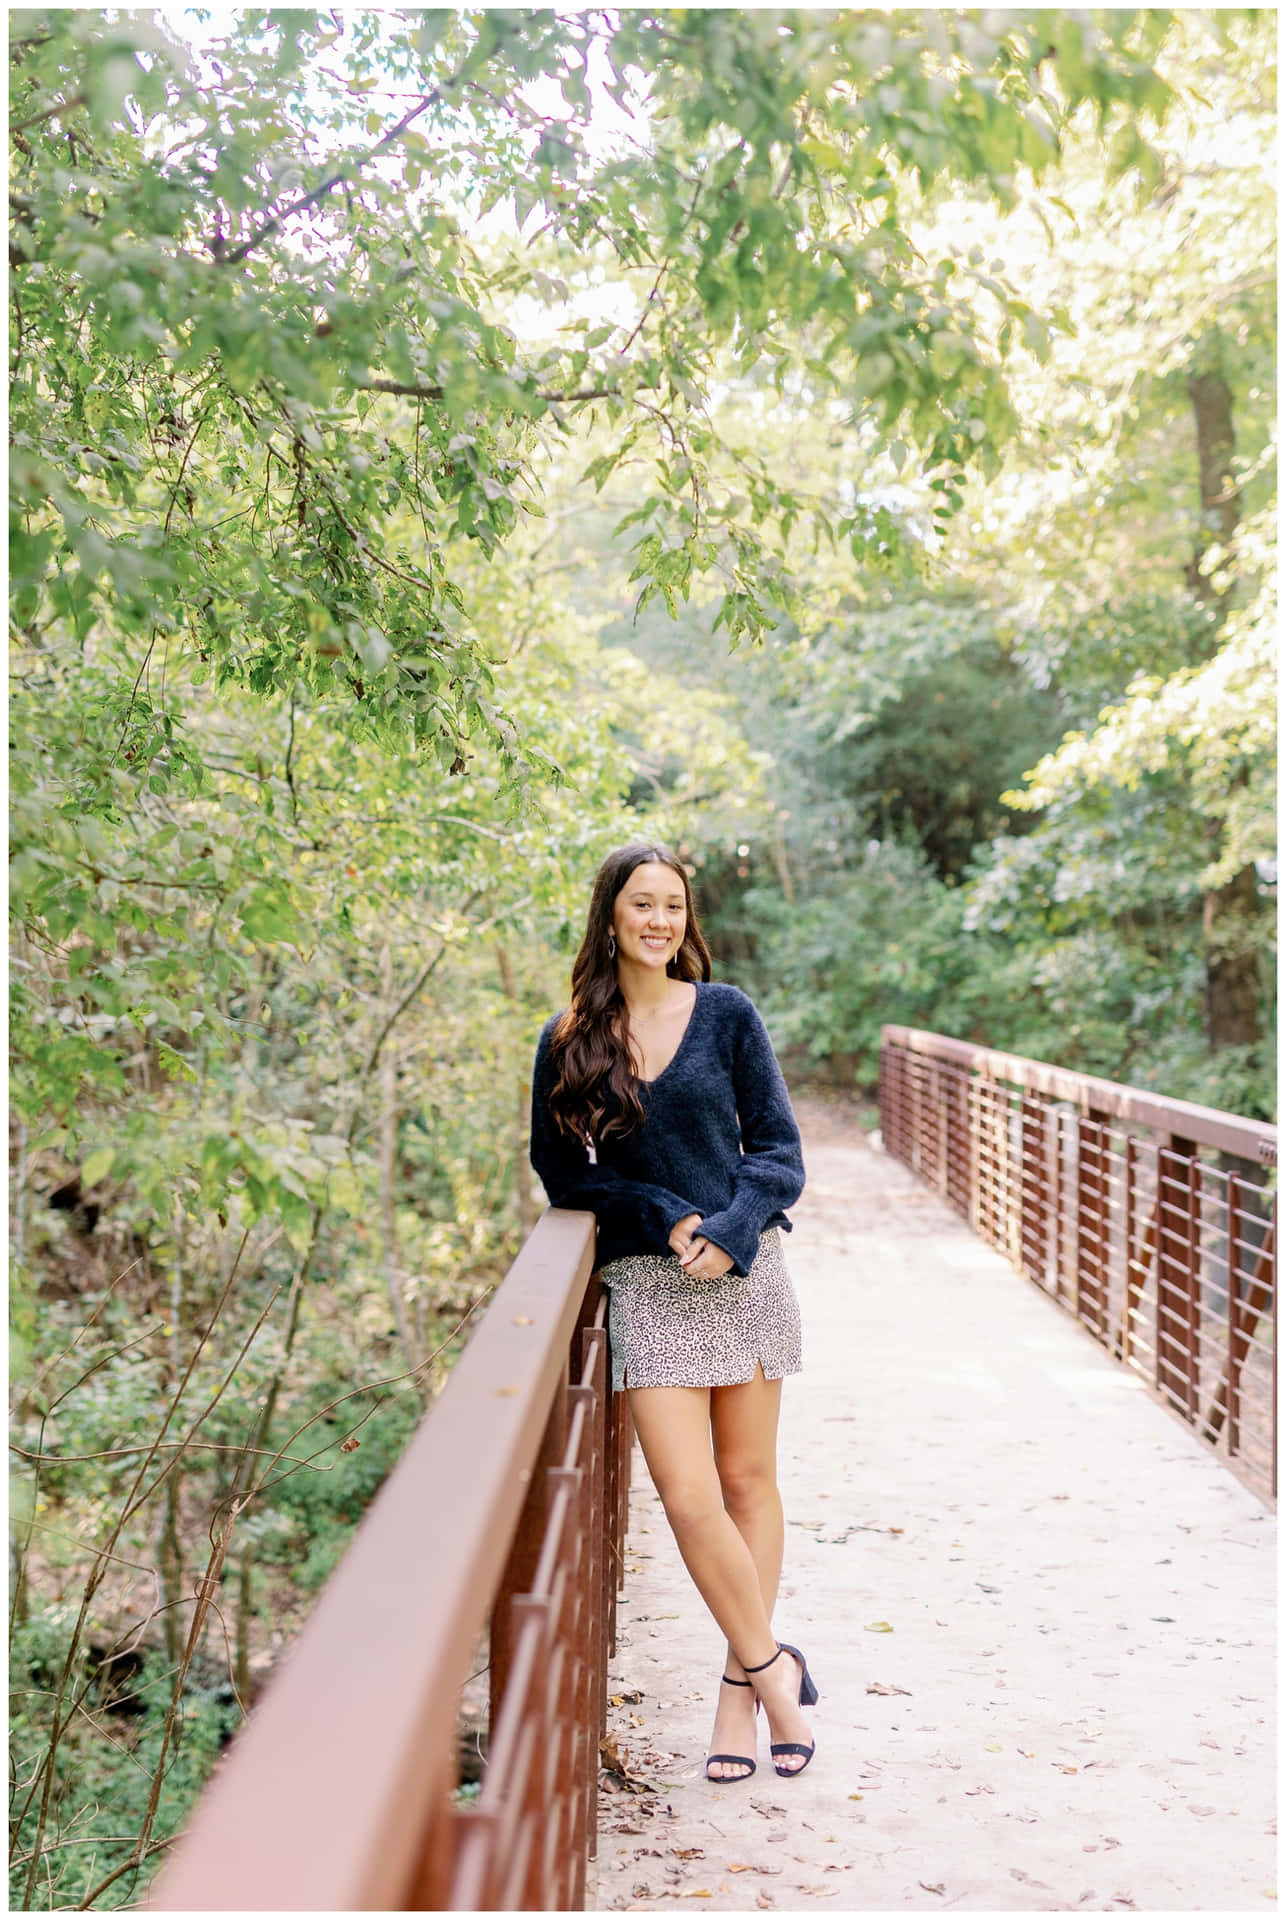 Show off your personality this fall with a stylish senior photo!